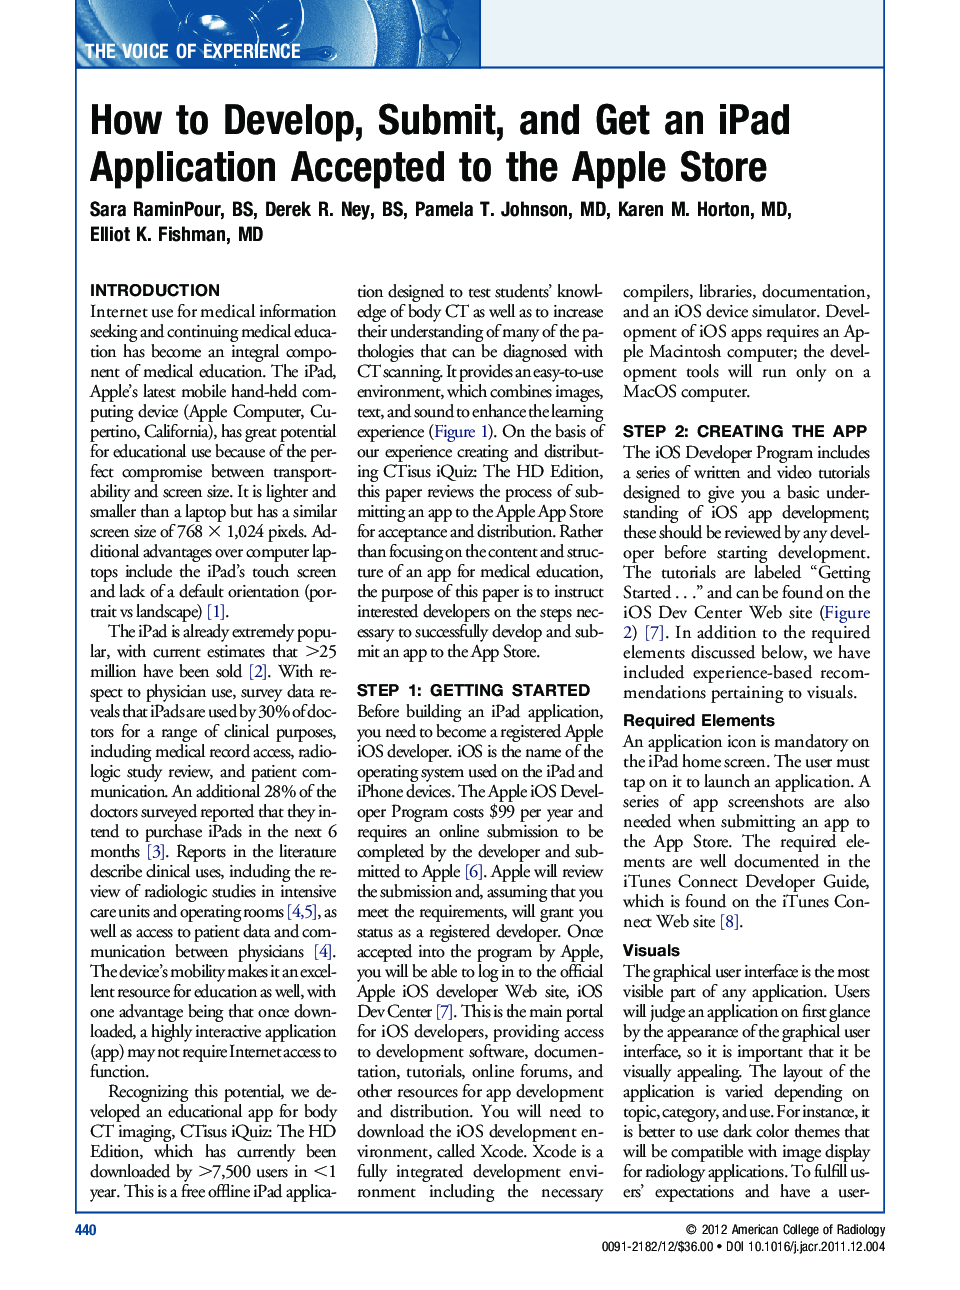 How to Develop, Submit, and Get an iPad Application Accepted to the Apple Store